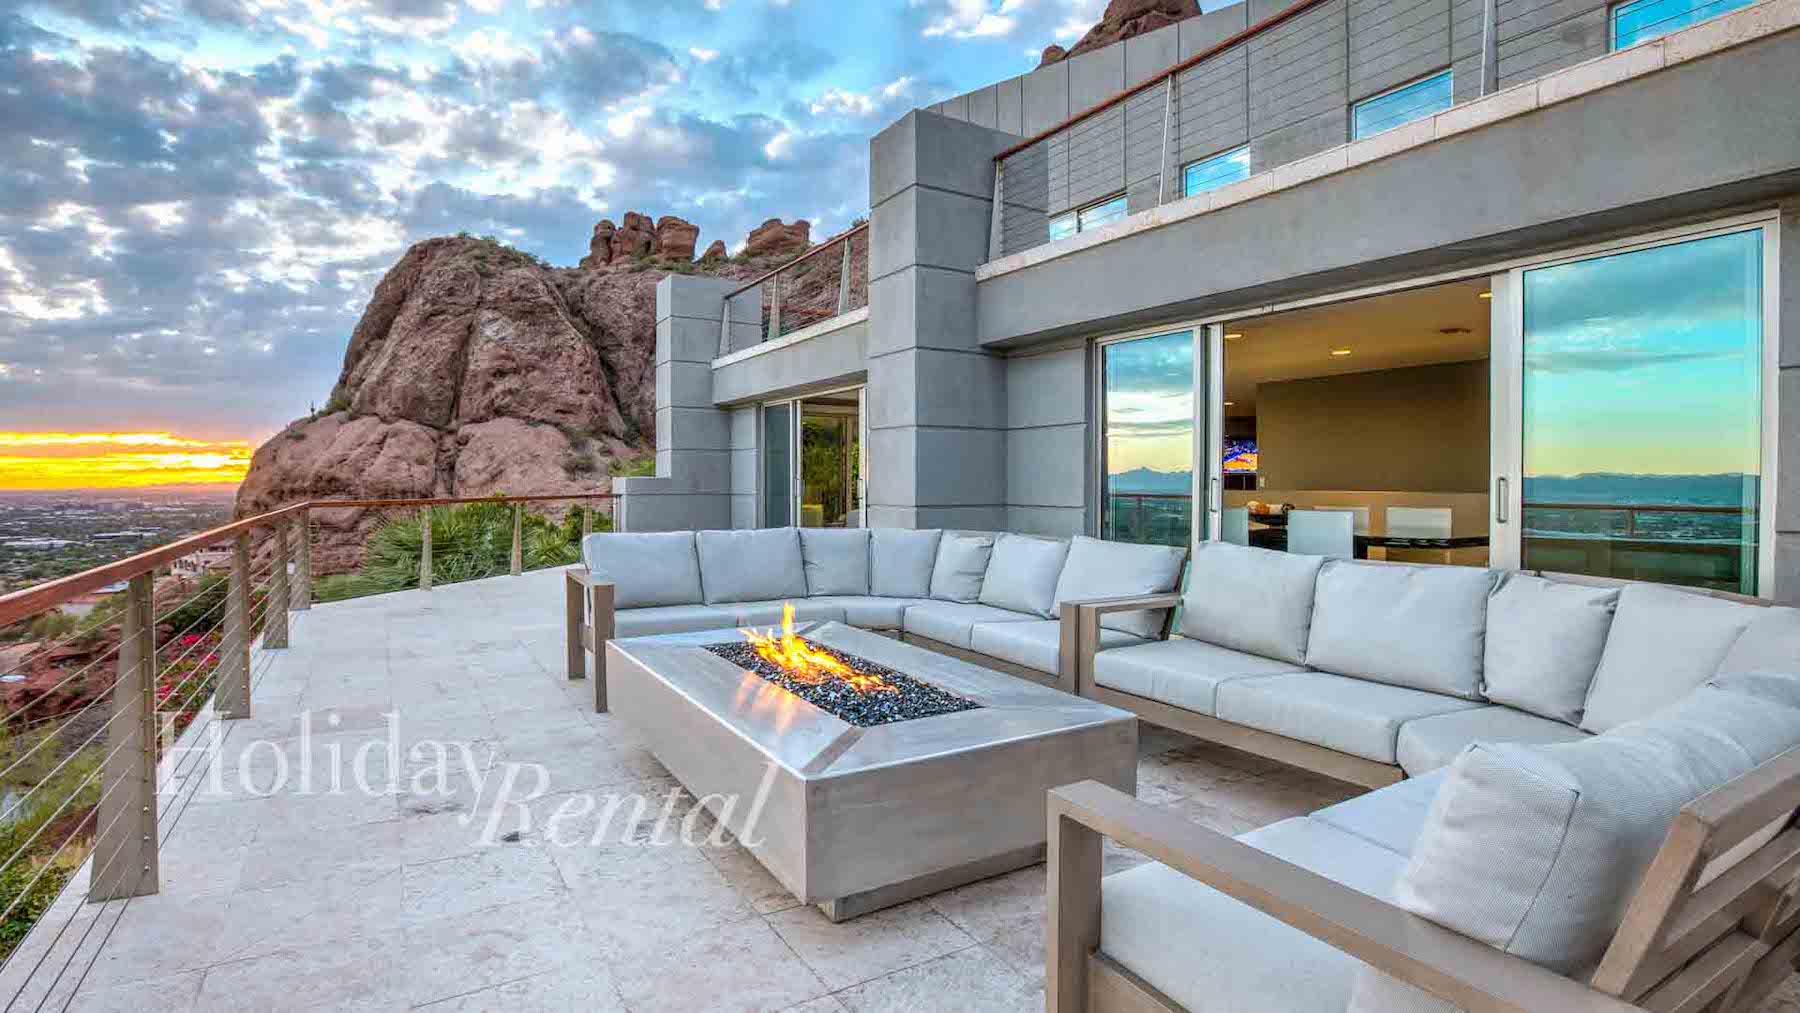 vacation rental firepit with mountain views